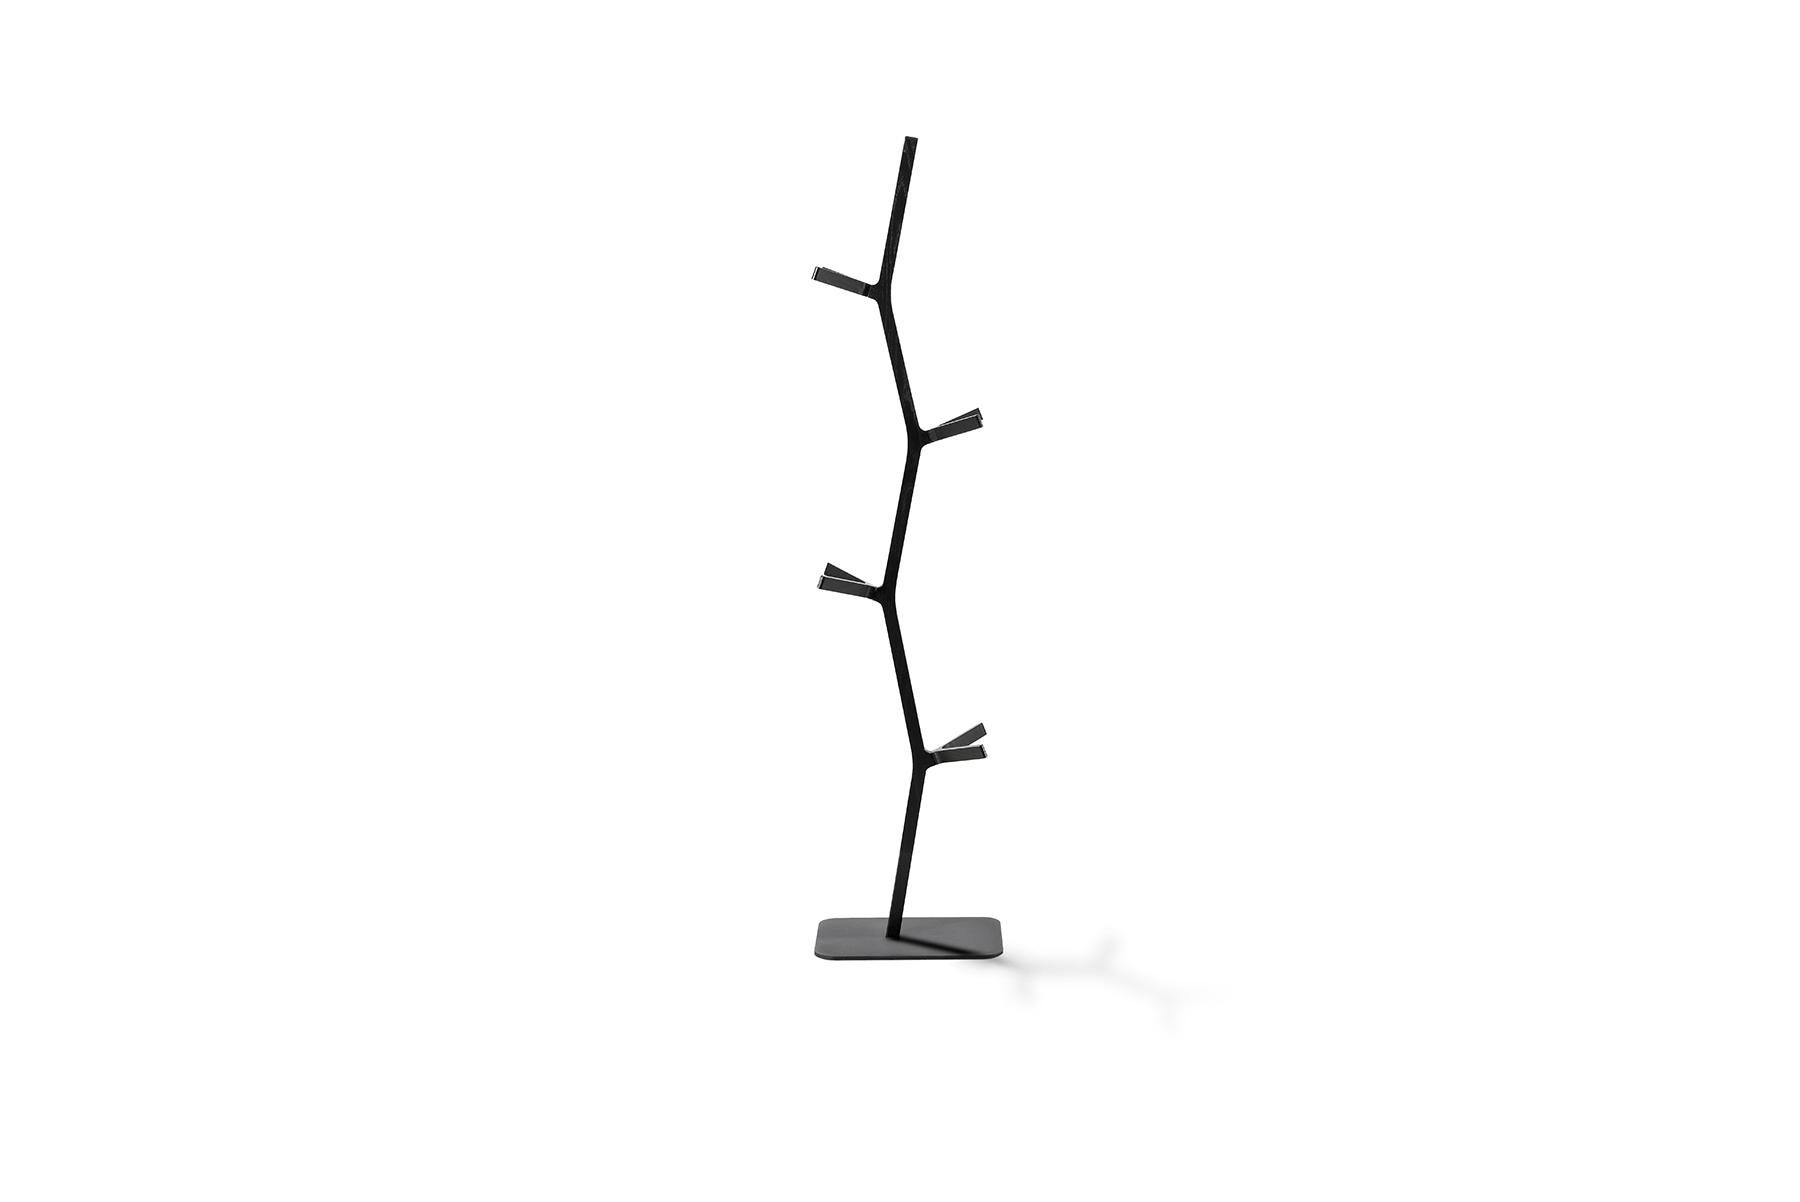 Shin Azumi Nara Coat Stand was designed by Shin Azumi as way to utilise the off cuts from production of the Nara chair. The result is a sculptural object with a graphical silhouette.